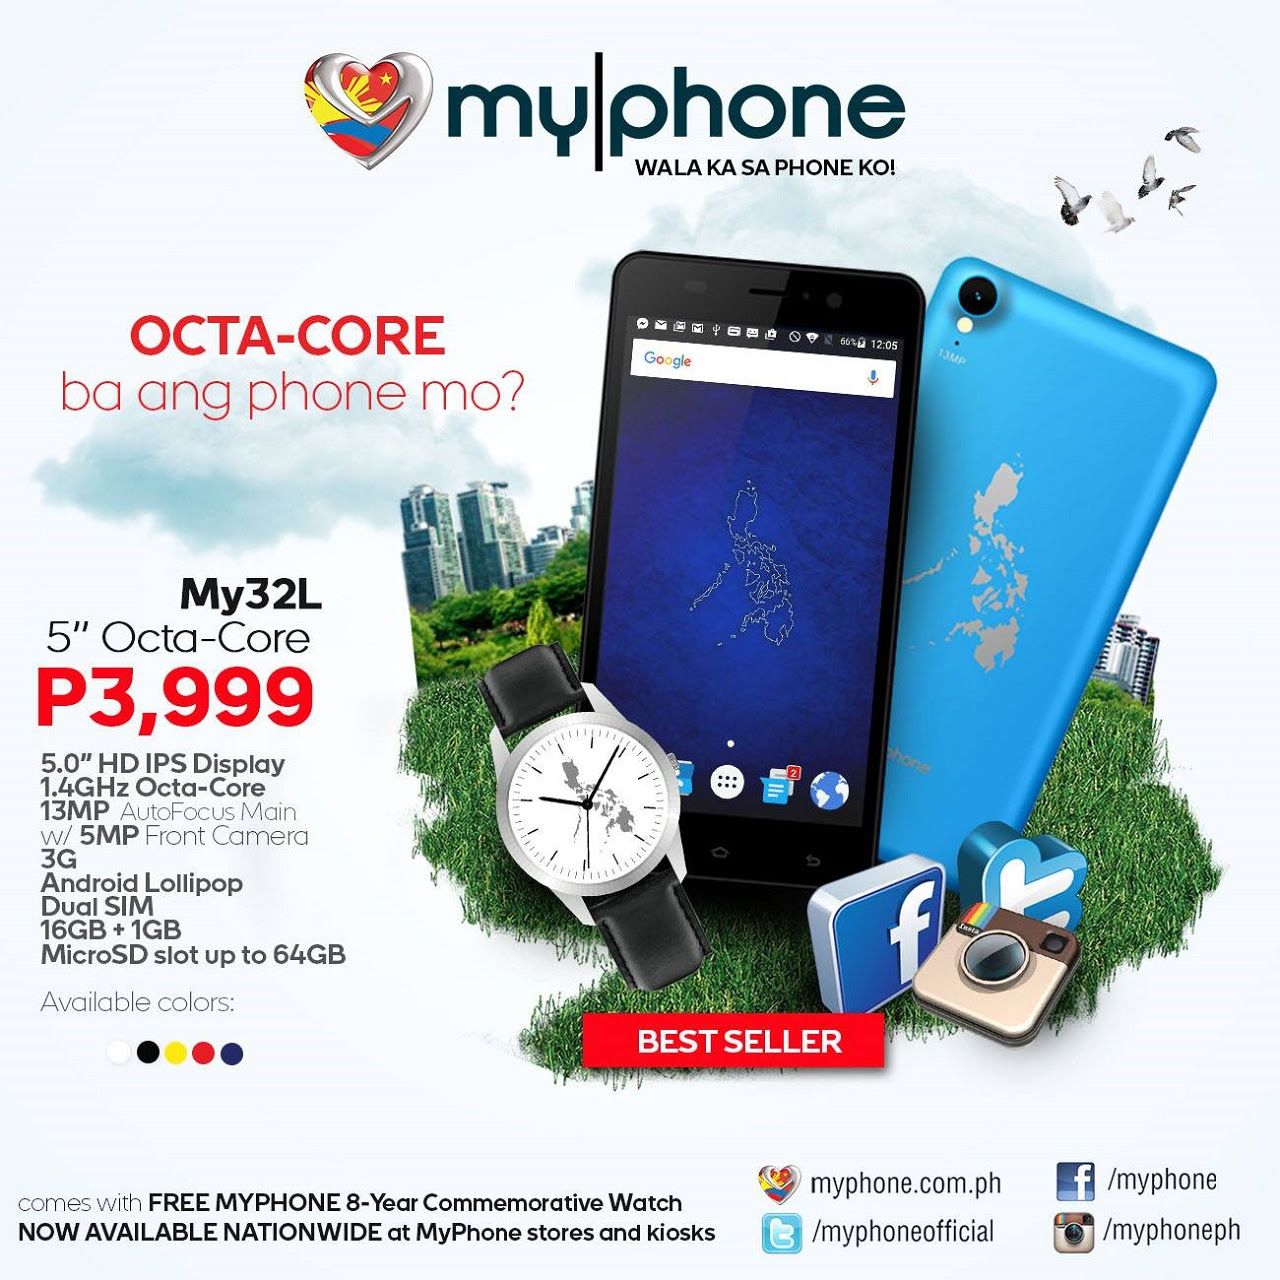 Cdiscount Telephone Portable Beau Myphone My32l with Octa Core soc In Philippine for PHP 3999